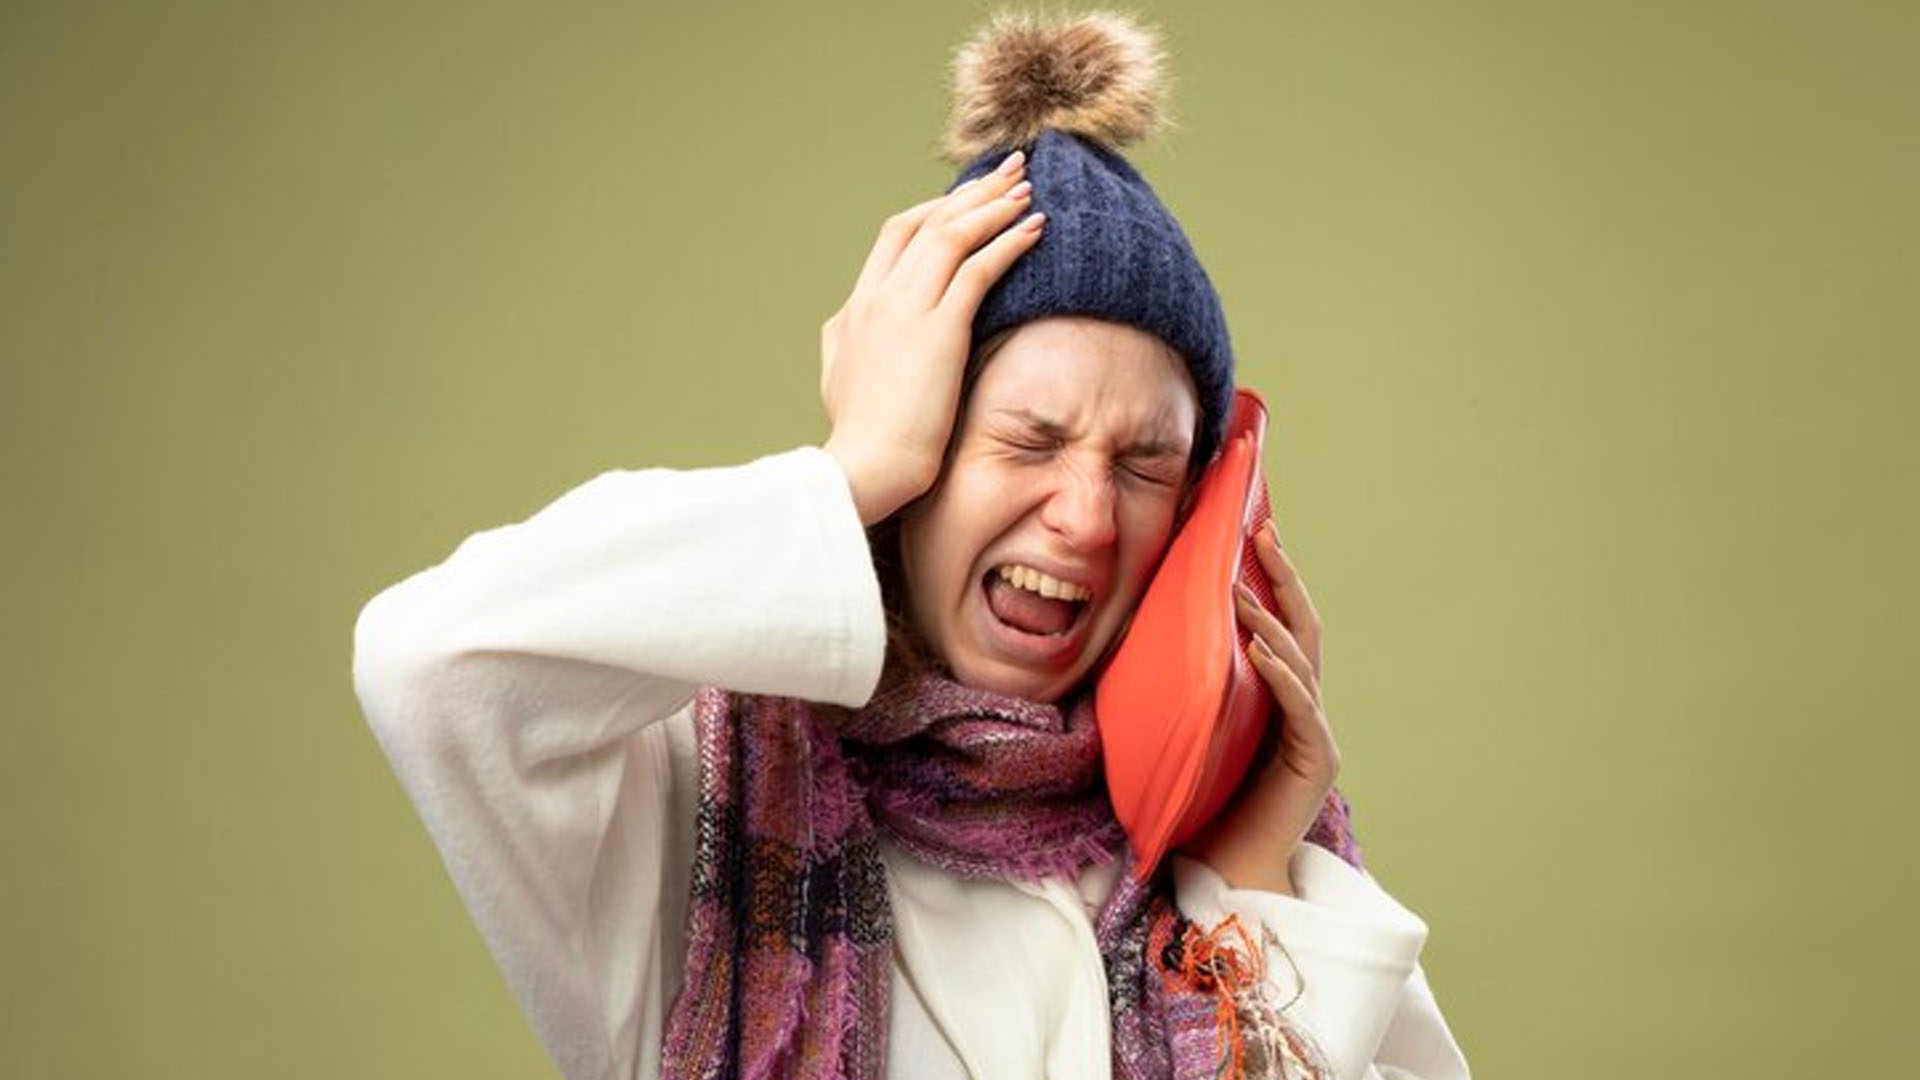 What are the Home Remedies for Ear pain due to Cold?